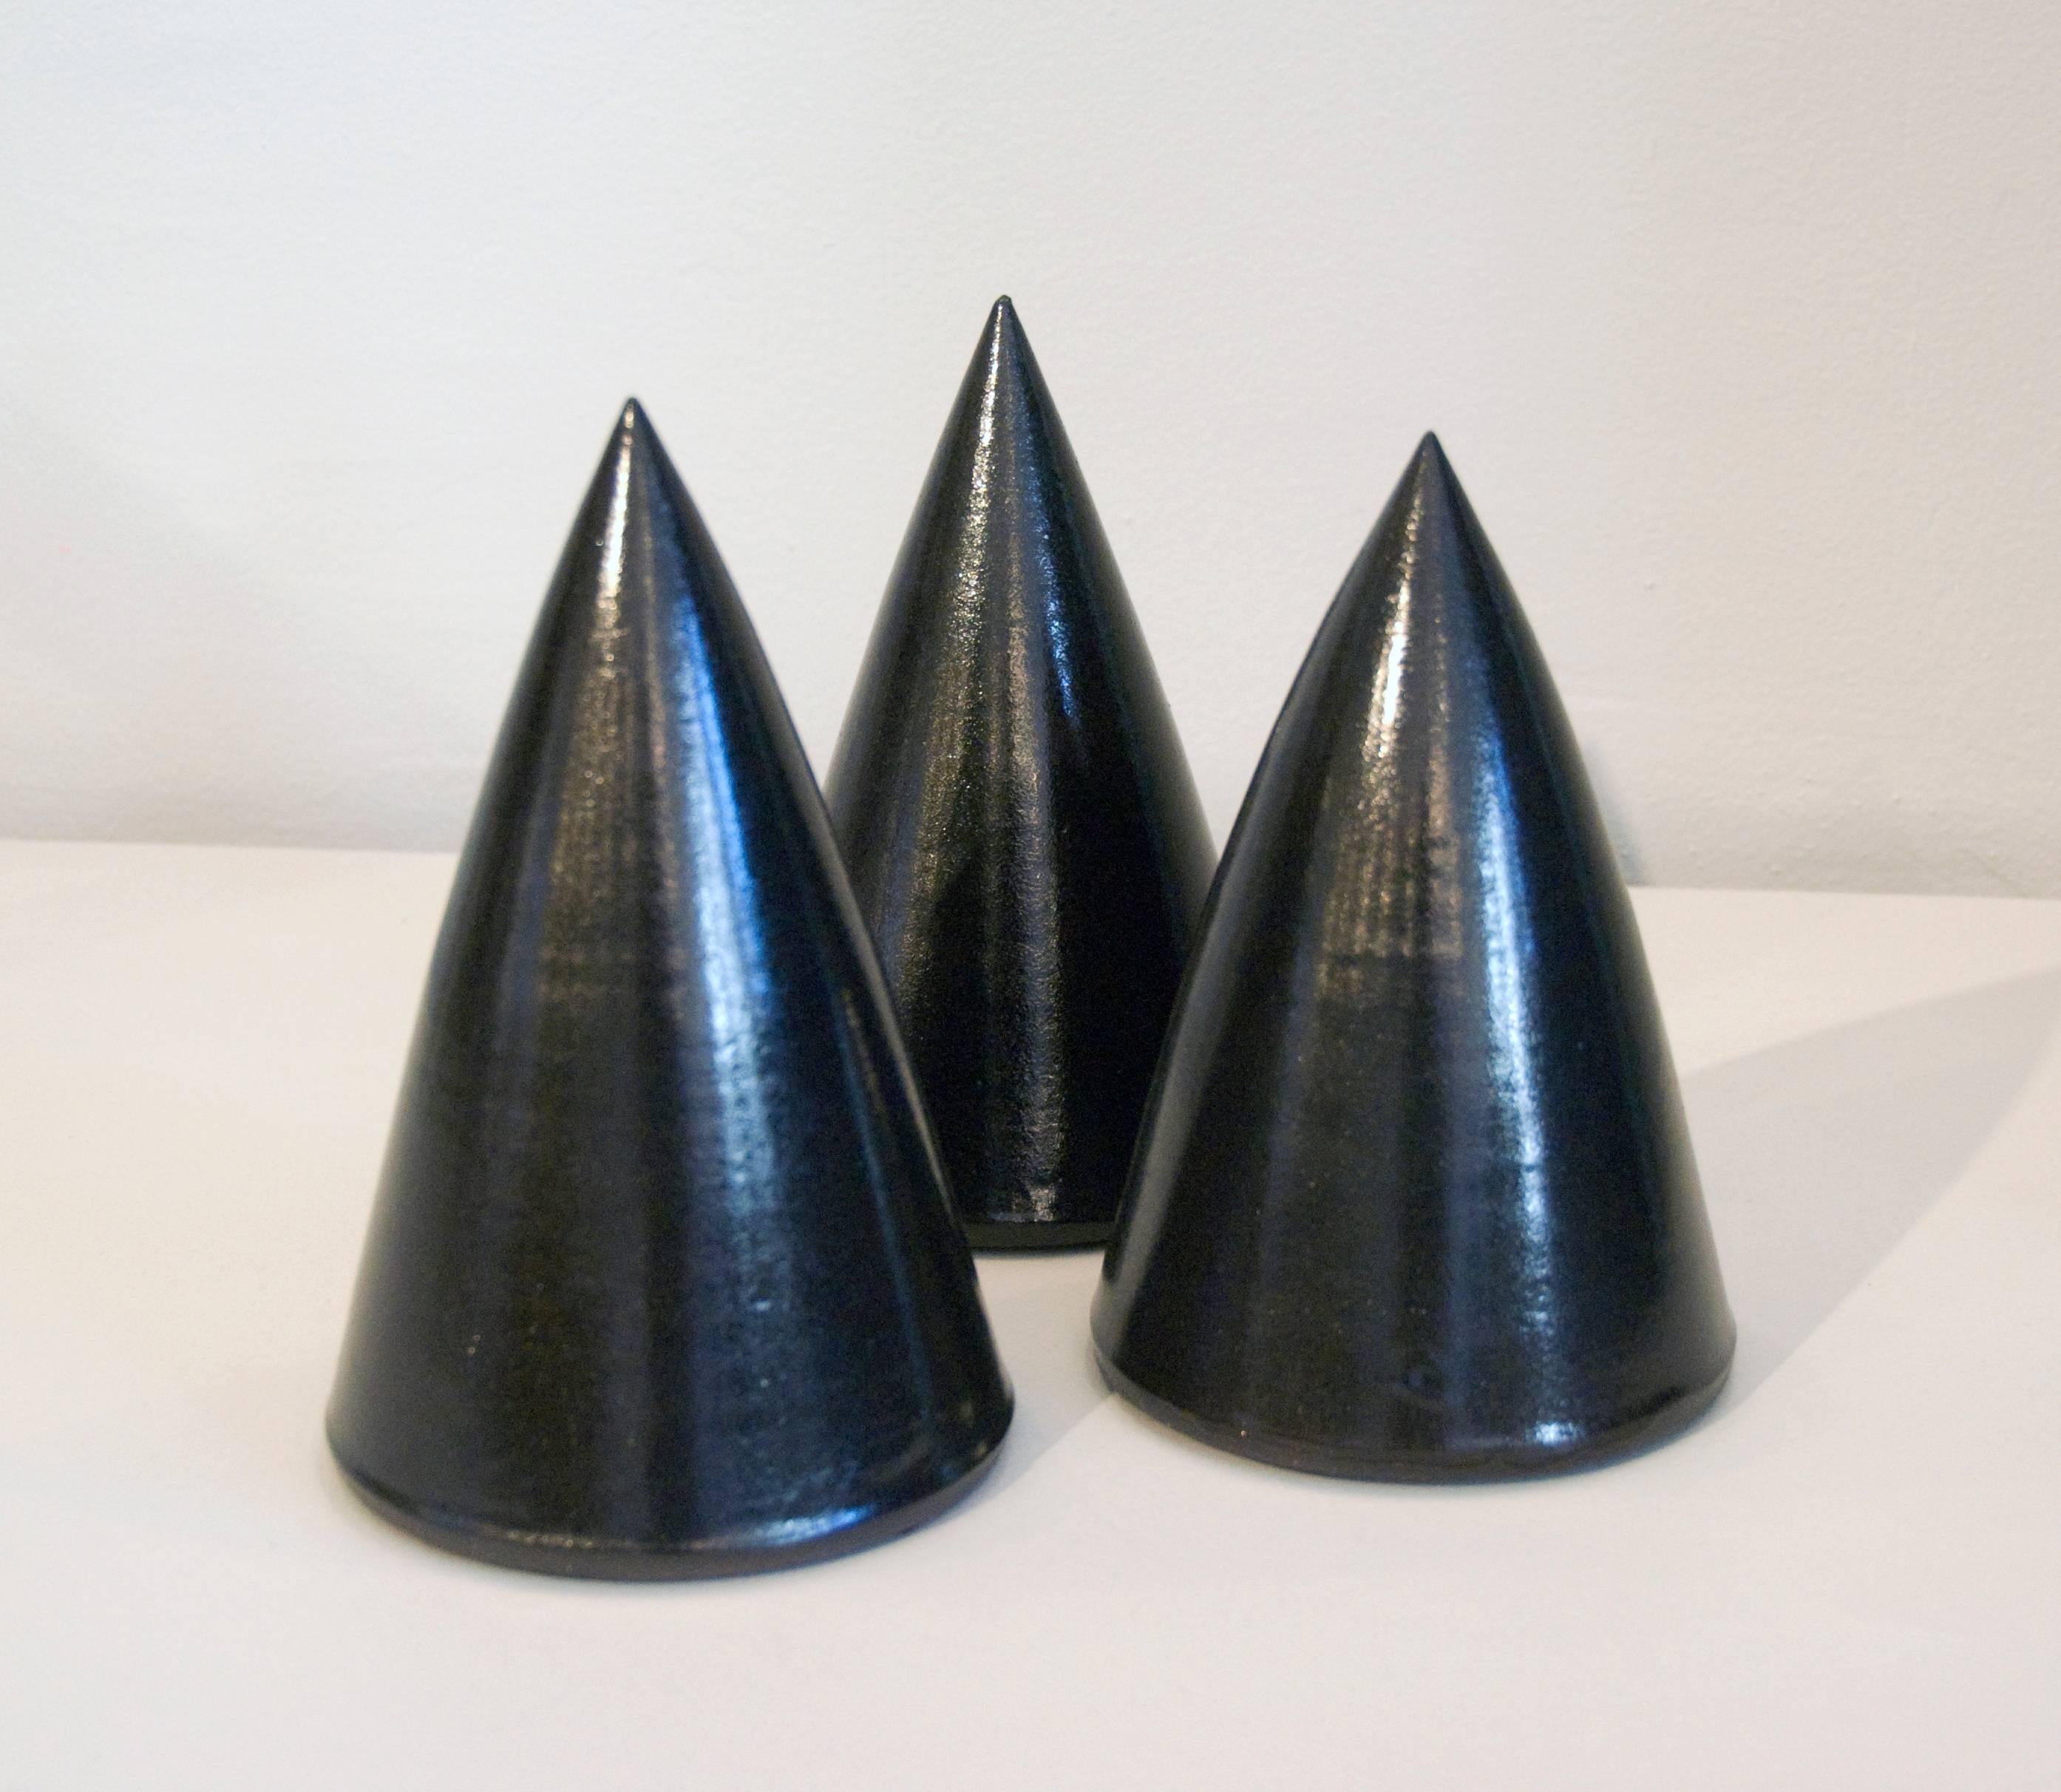 This small spike sculptures is made from high fired stoneware in a graphite glaze in 2011 is the work of sculptor James Salaiz. 

James Salaiz is a sculptor and ceramicist based in New York City. His first experience with clay was as a young child